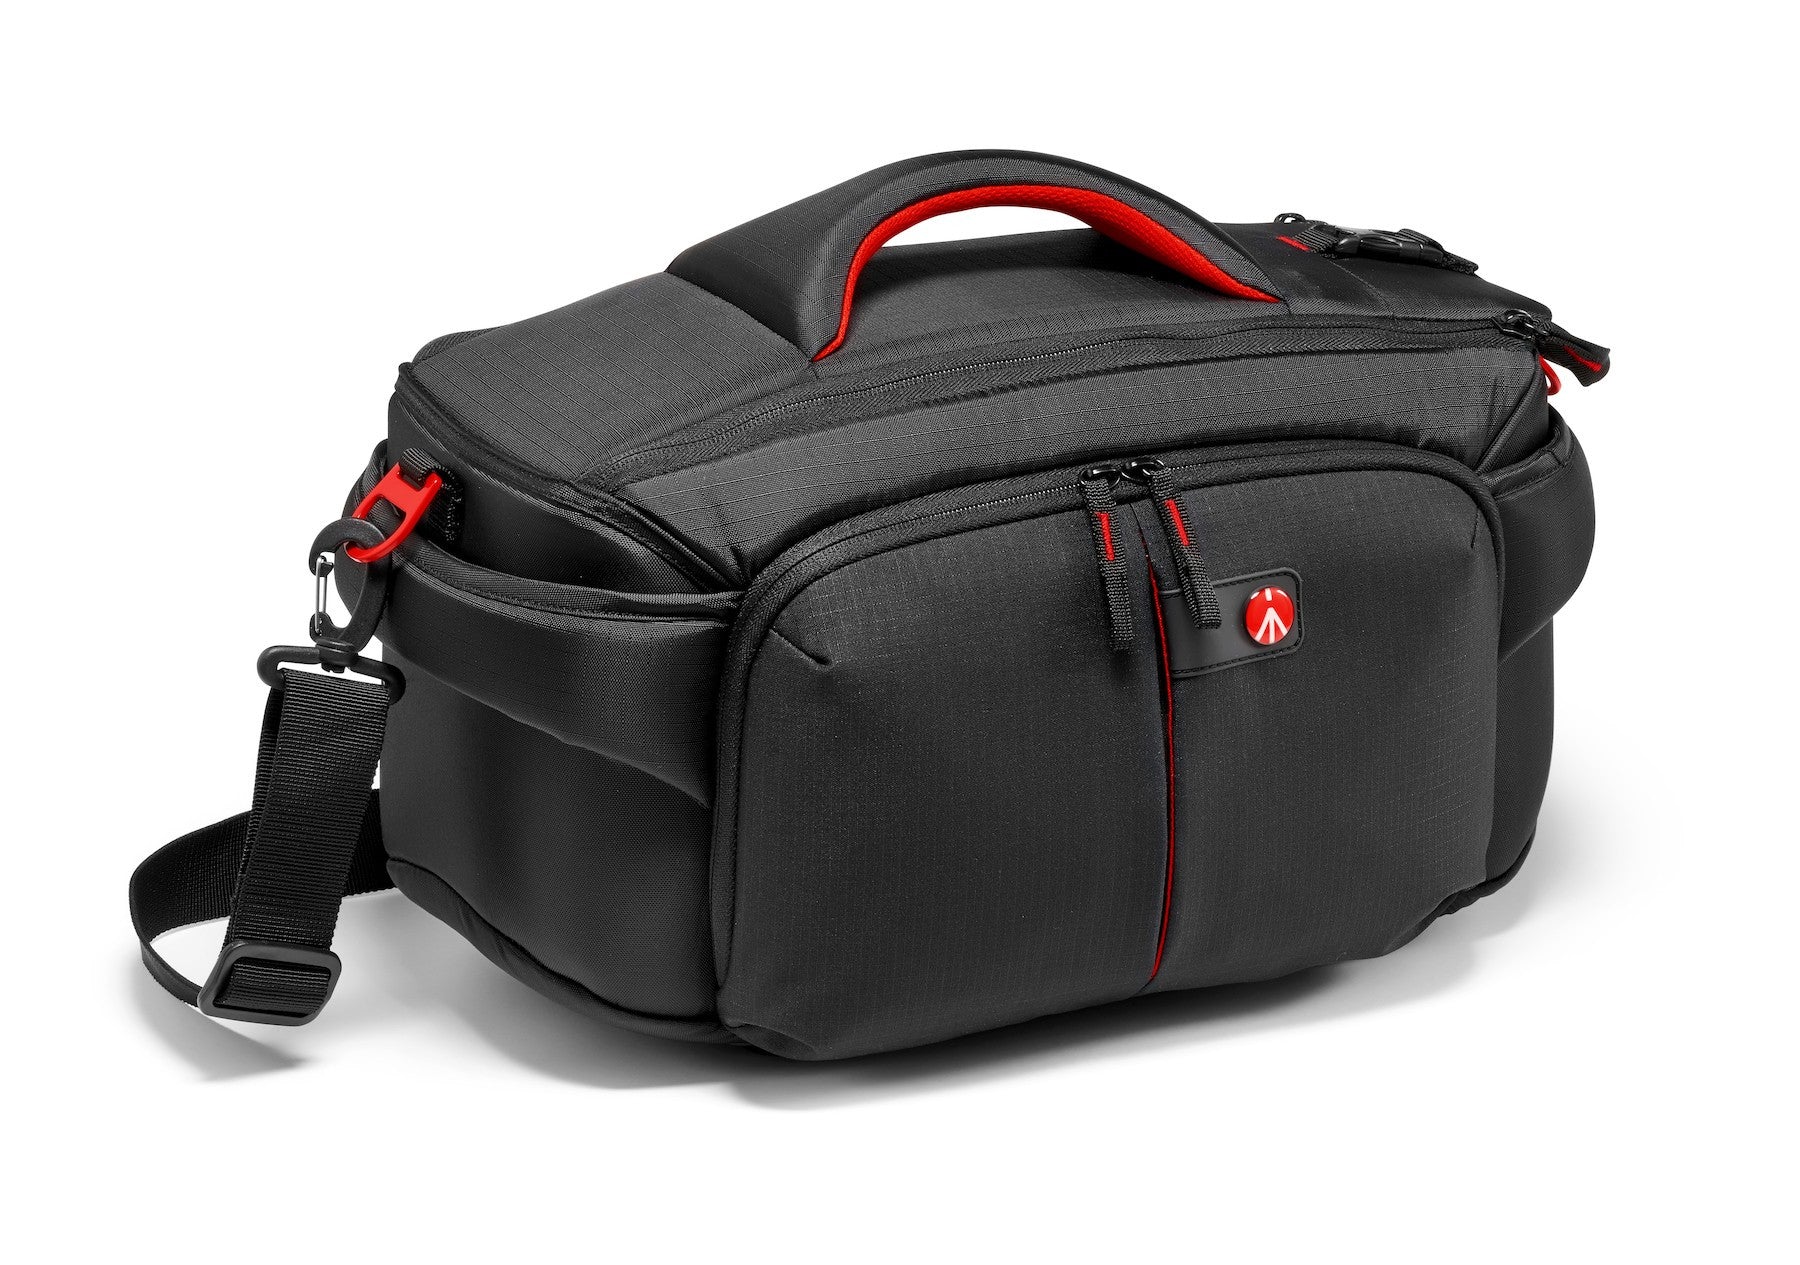 Manfrotto CC-191N Pro Light Video Case, bags soft cases, Manfrotto - Pictureline  - 1